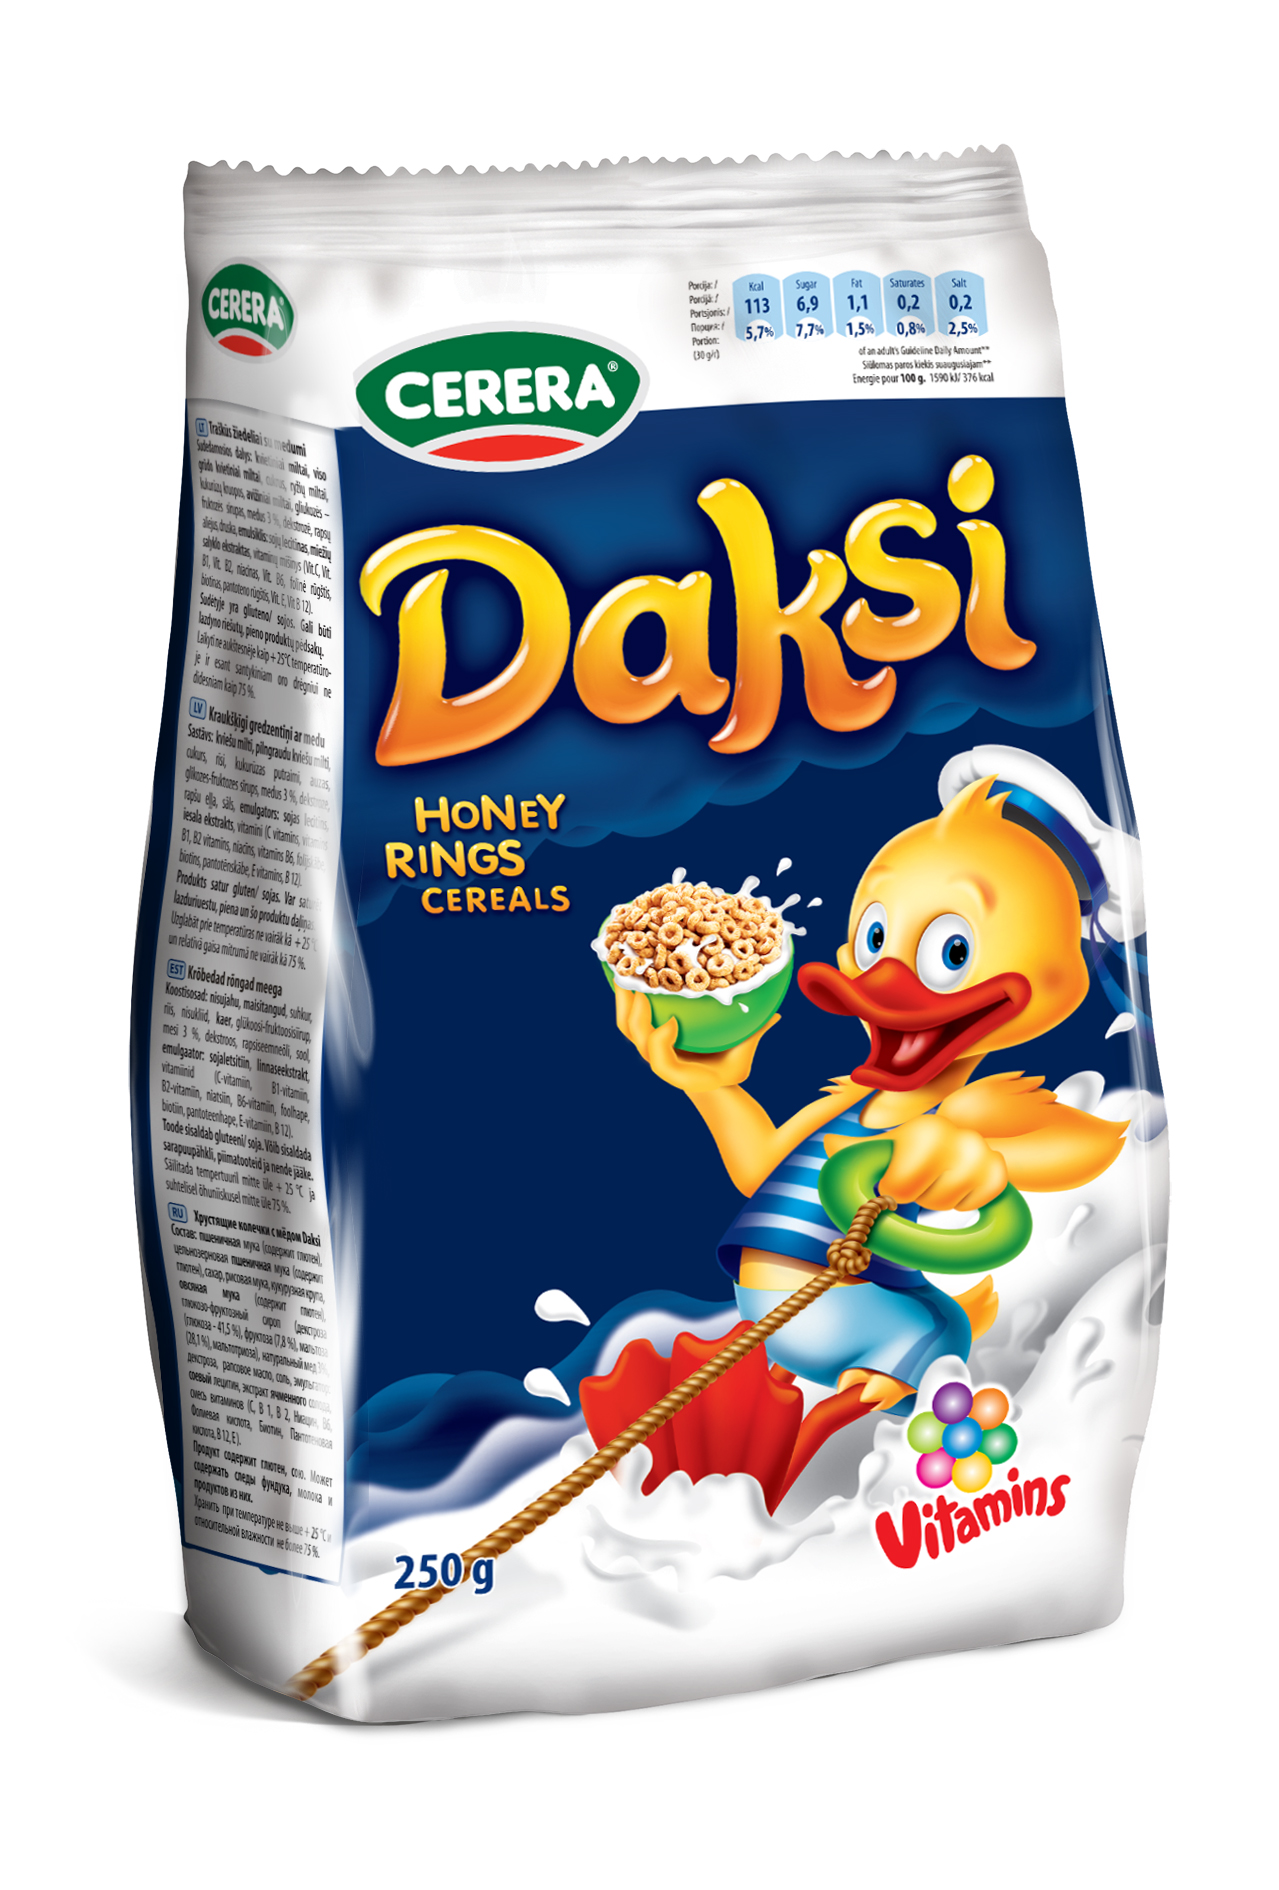 daksi honey medus breakfast cereal businessowner businessgrowth business management realestate markets innovation technology breakfast cereal manufacture tasty food cerera foods shape form taste color chocolate balls pillows shells corn flakes rings brand private label choco honey cookie sticks puffs puffed lithuania manufactory vanilla hazelnut cinamonn rice wheat cereo fruity hoops fruit production line company supply snack snacks retail wholesale distribution import daksi